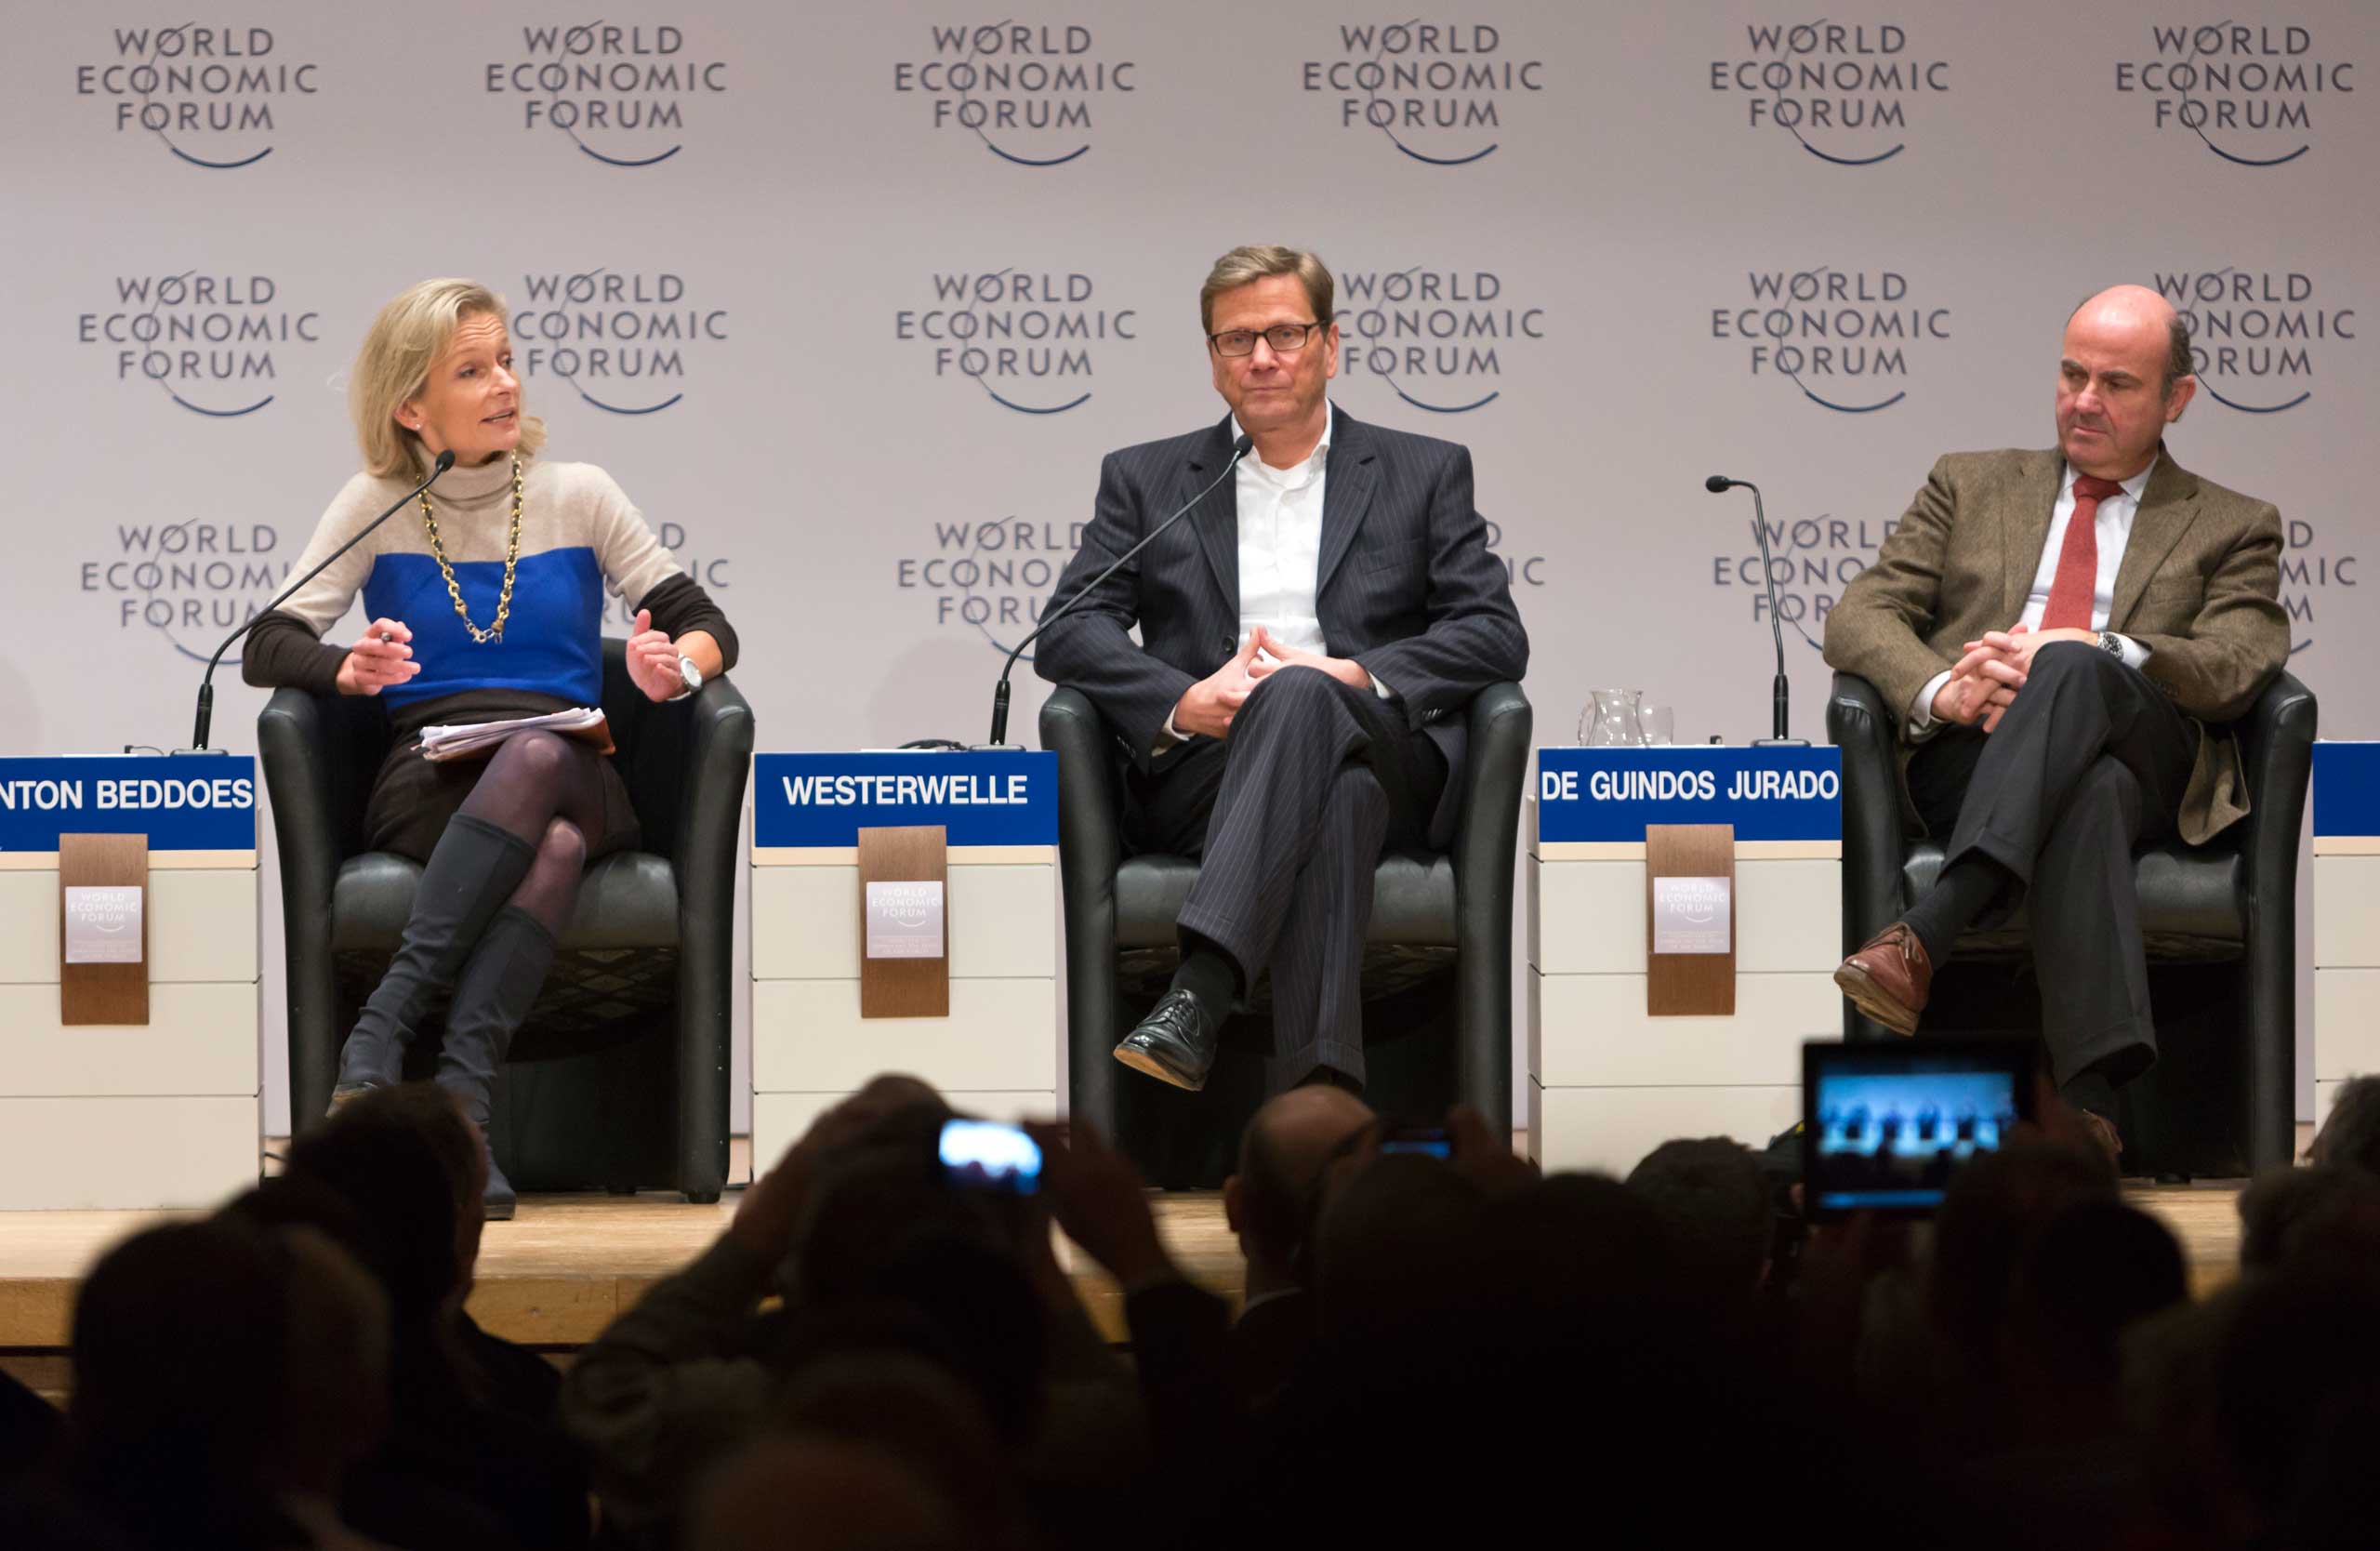 Zanny Minton Beddoes moderates a conversation between German Foreign Minister Guido Westerwelle and Luis de Guindos Jurado, Spanish Minister for Economy, on Jan. 25, 2013 in Davos. (Raphael Huenerfauth—Photothek/Getty Images)